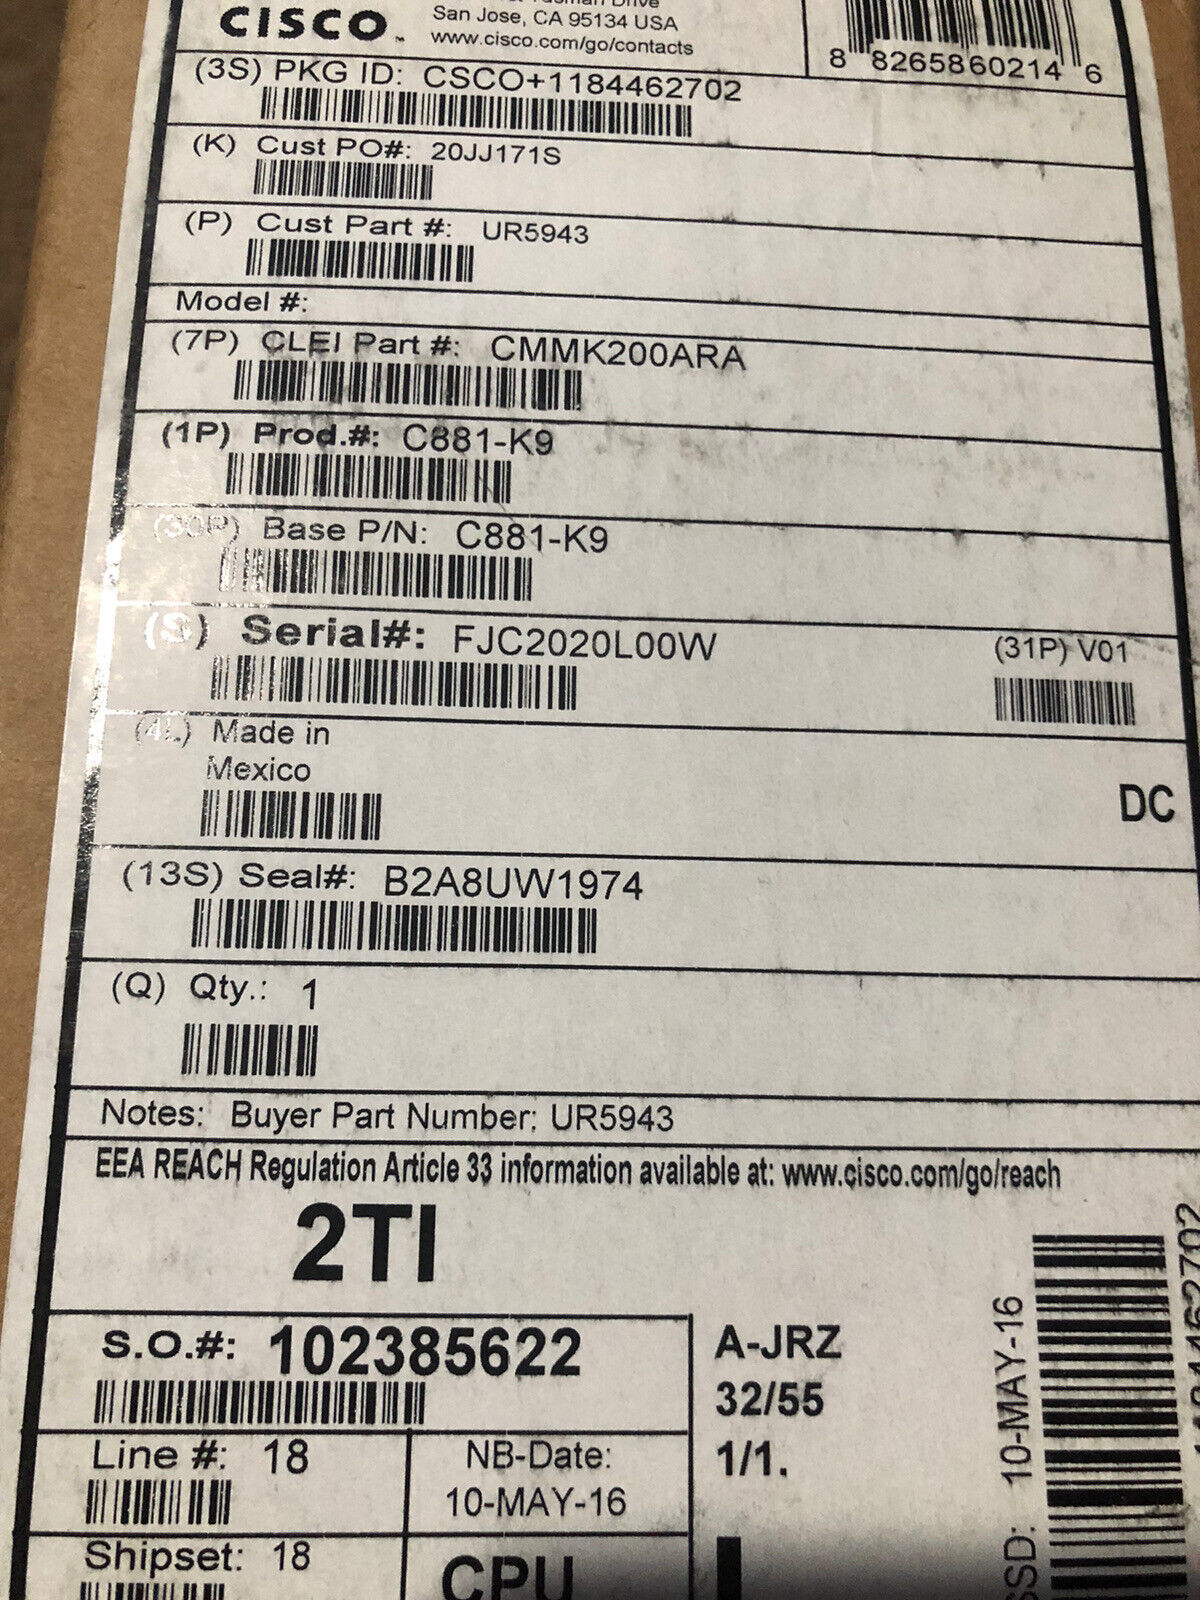 NEW in 独創的 Box Sealed 【お気に入り】 CISCO 881-K9 l Ethernet Security Router w LAN